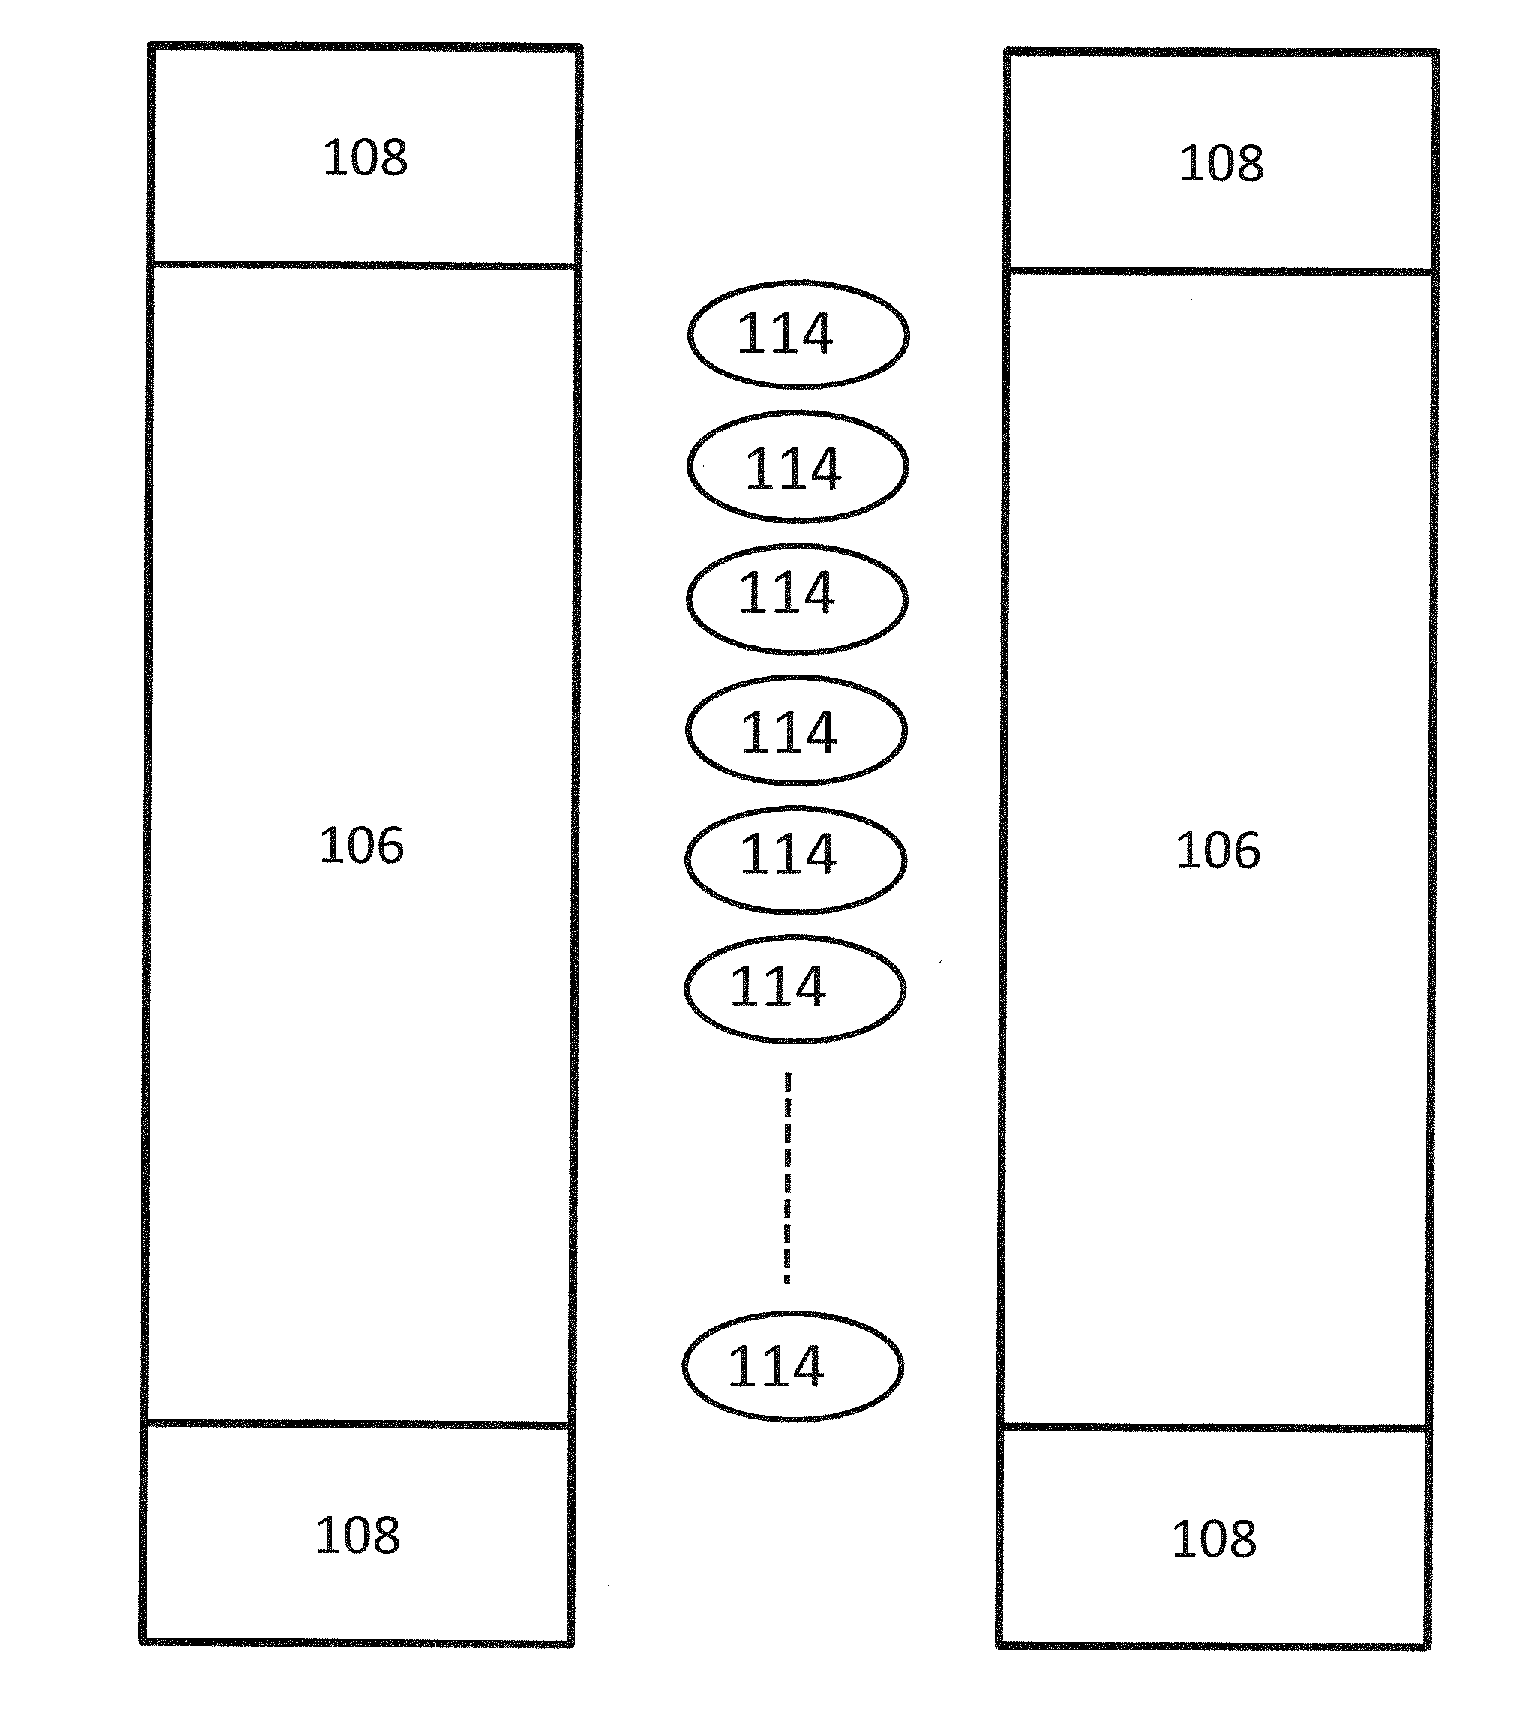 Scintillating organic materials and methods for detecting neutron and gamma radiation